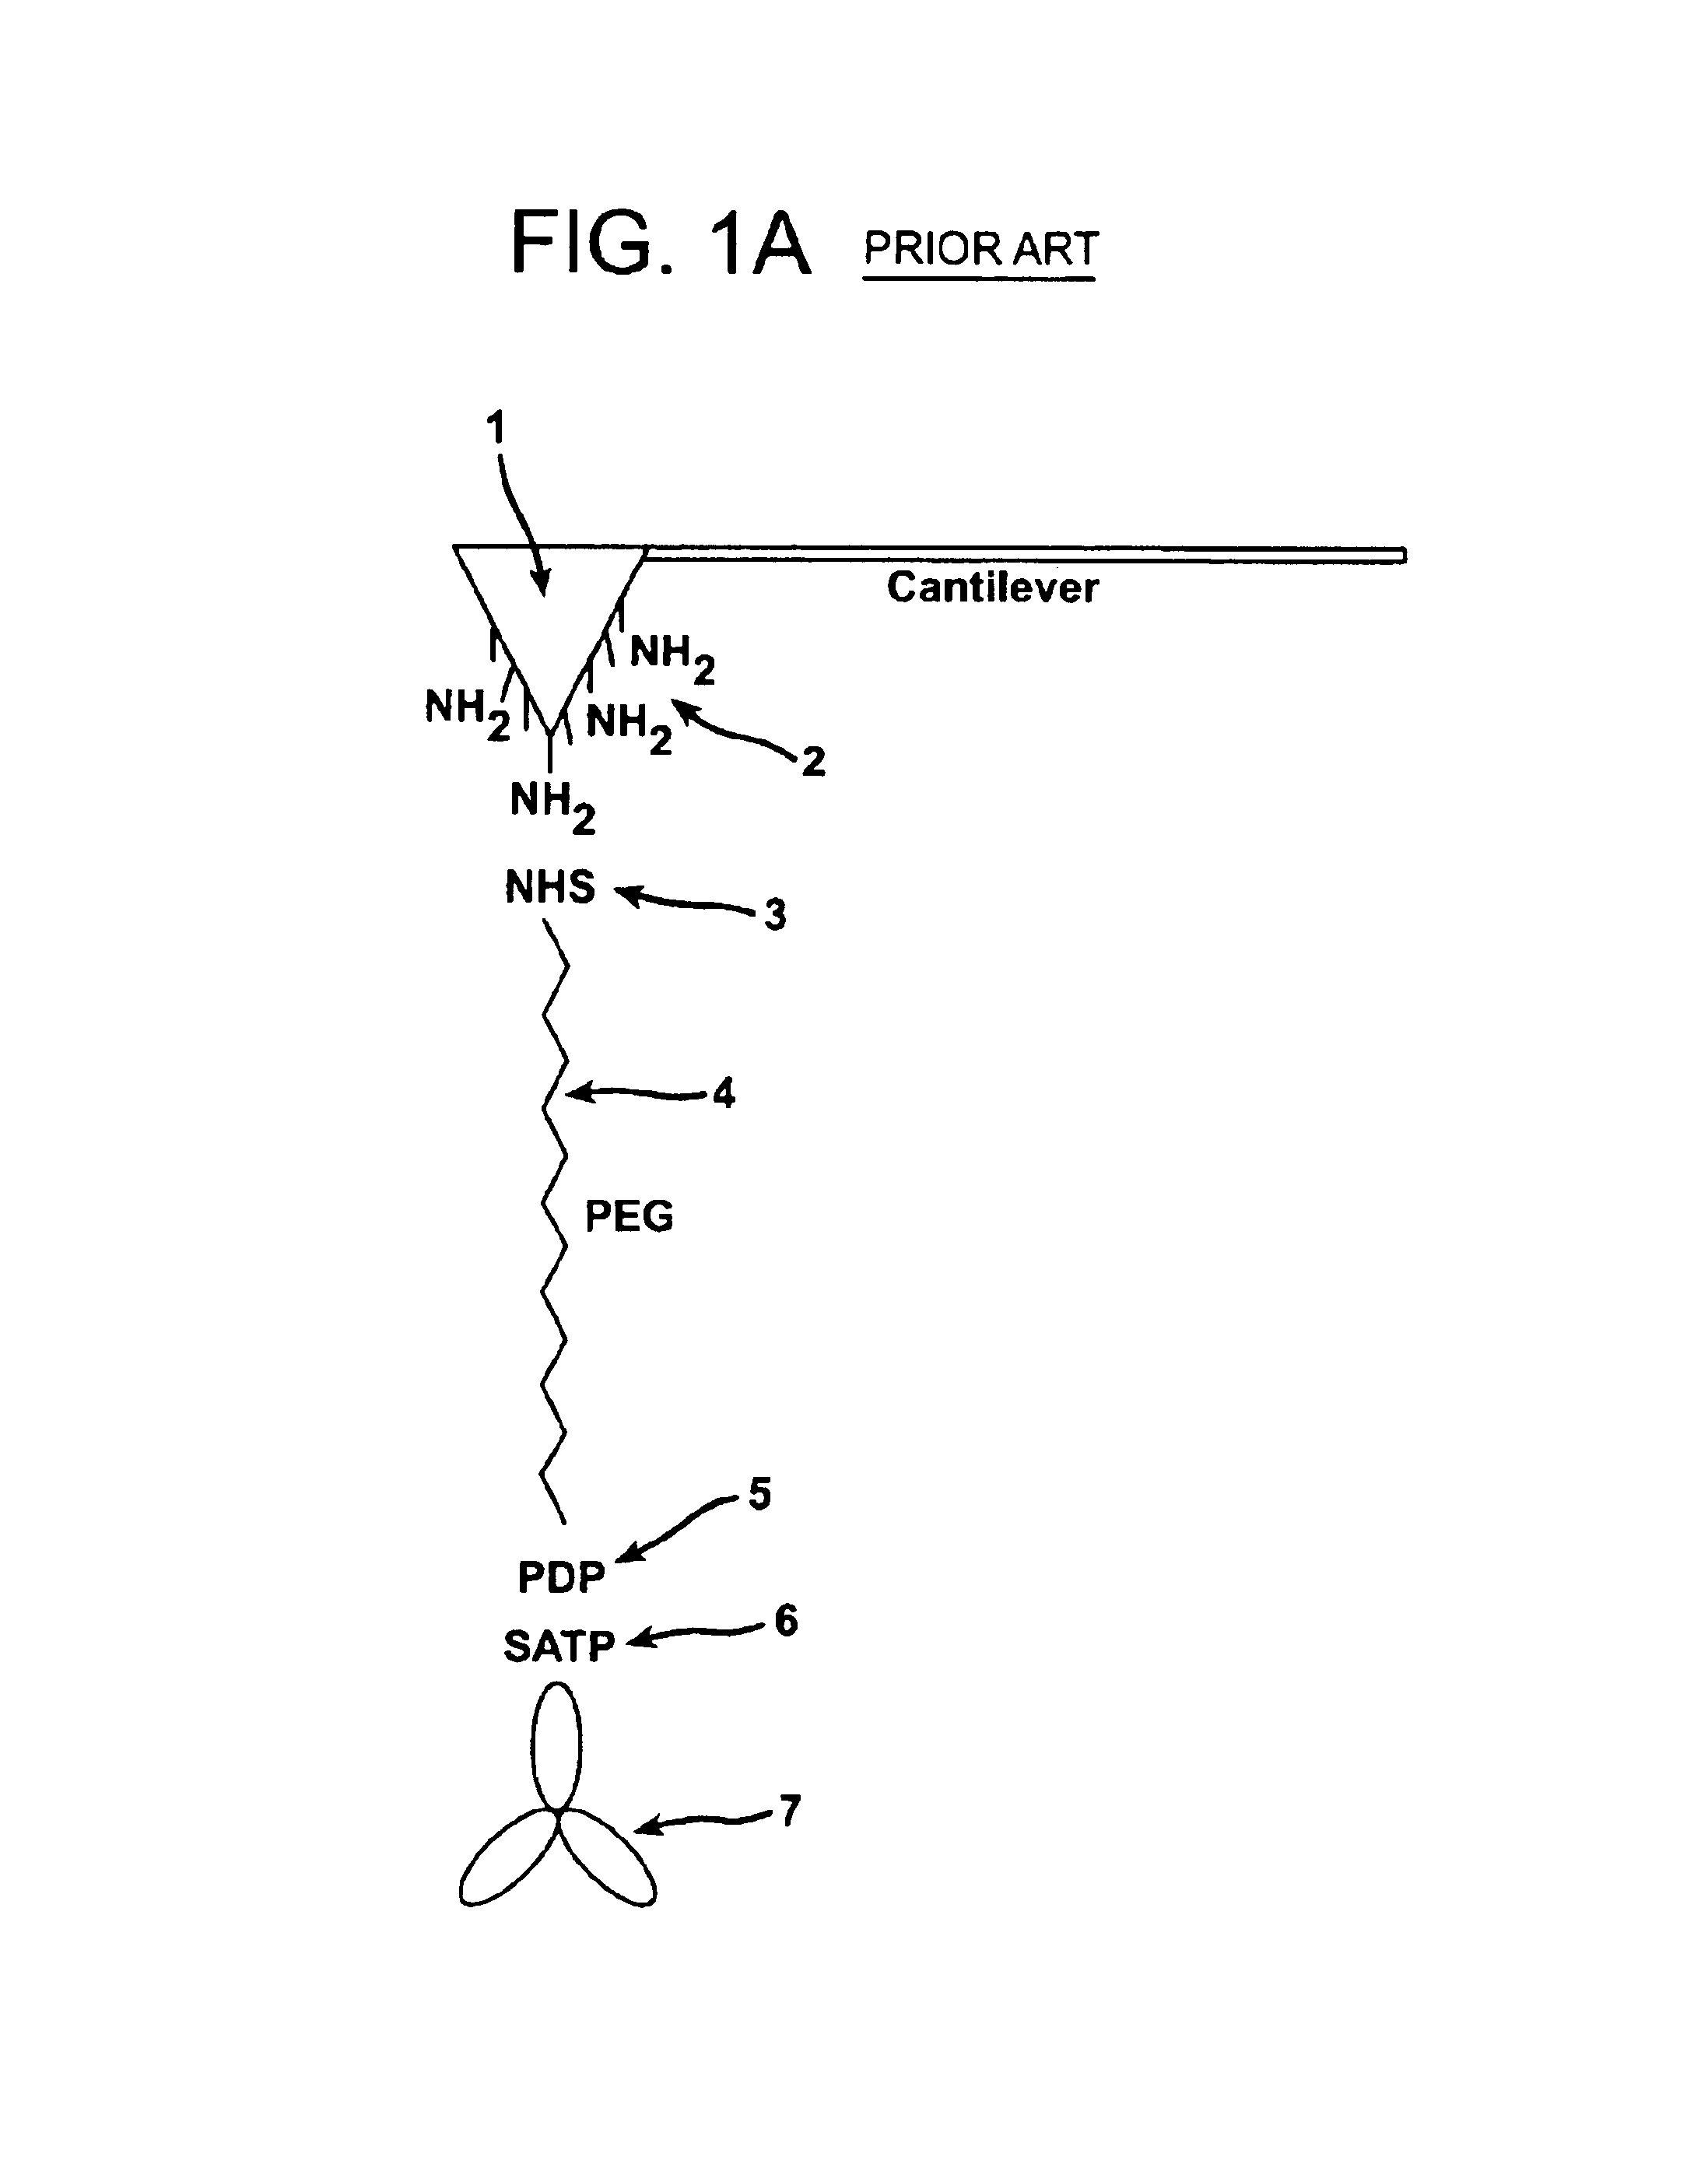 Topography and recognition imaging atomic force microscope and method of operation